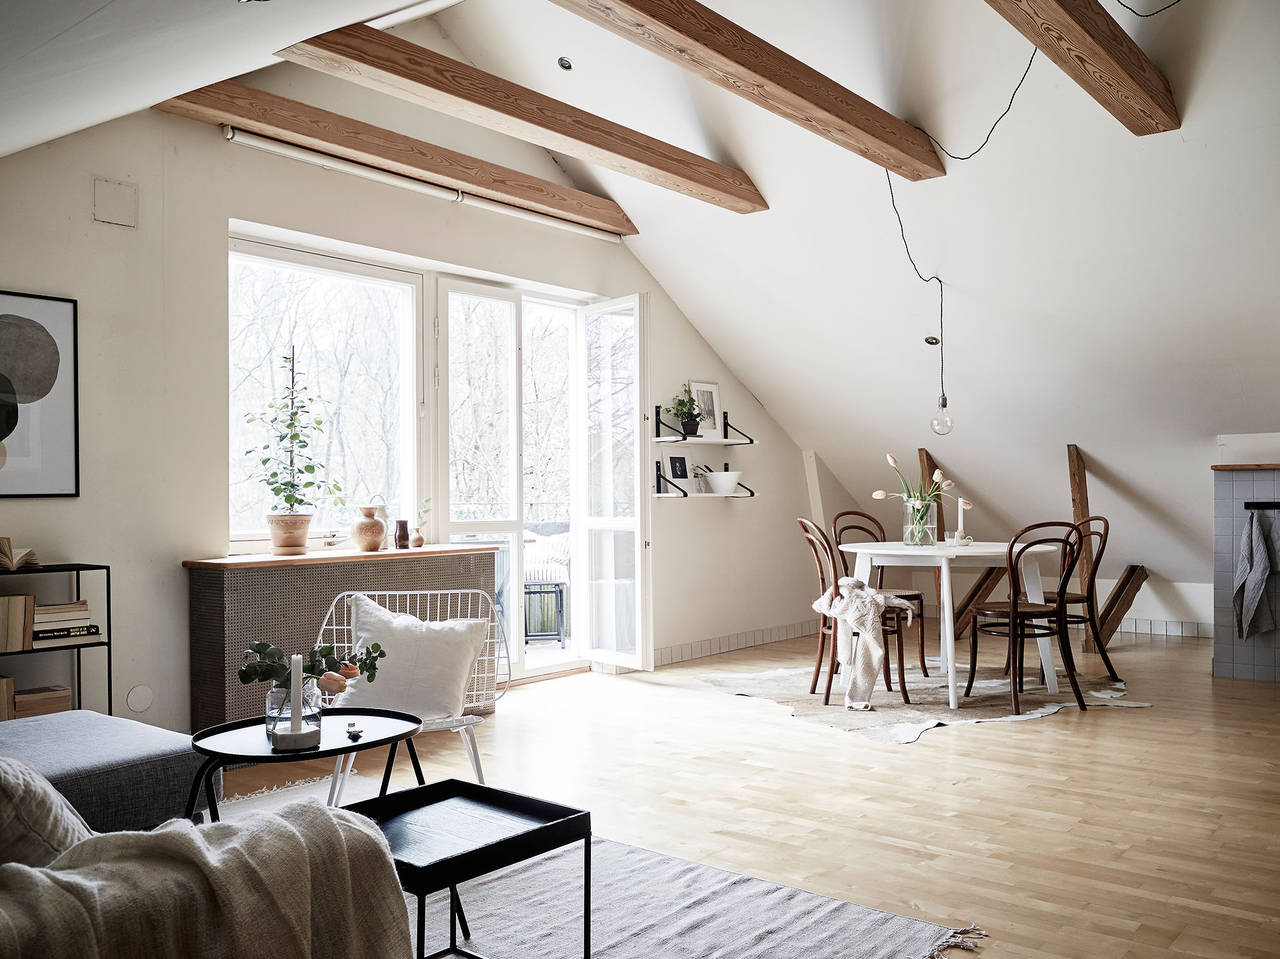 These Are The Attic Design Ideas You Have Been Looking For 7